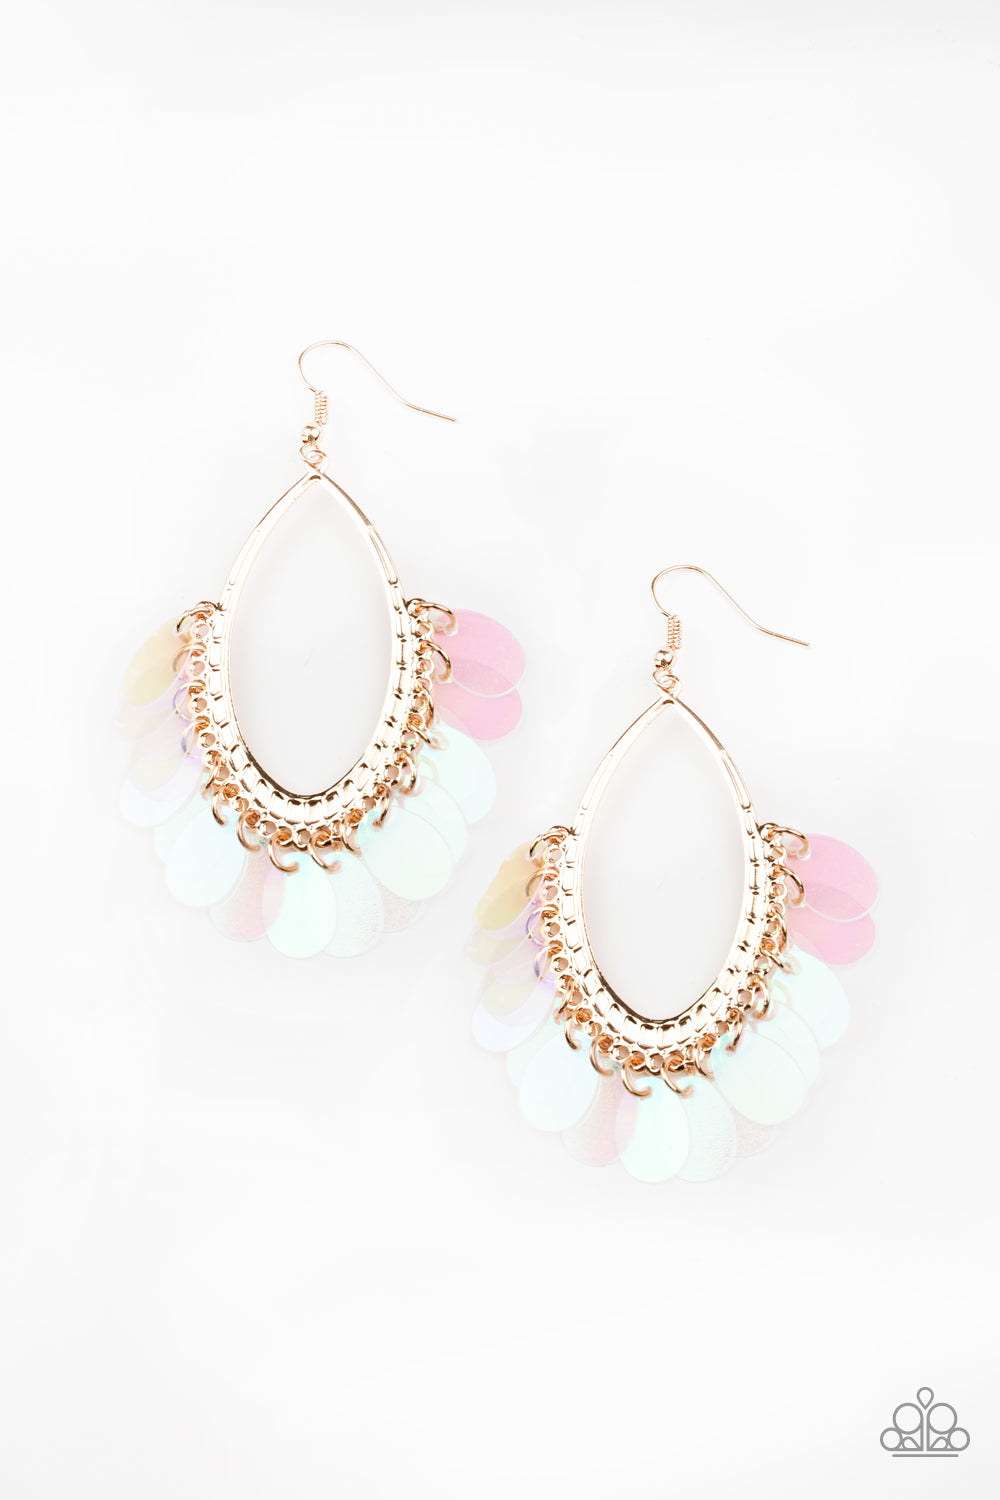 &lt;P&gt;Iridescent sequins dangle from the bottom of a textured gold oval, creating an effervescent fringe. Earring attaches to a standard fishhook fitting.&lt;/P&gt;  

&lt;P&gt; &lt;I&gt;  Sold as one pair of earrings. &lt;/I&gt;  &lt;/P&gt;


&lt;img src=\&quot;https://d9b54x484lq62.cloudfront.net/paparazzi/shopping/images/517_tag150x115_1.png\&quot; alt=\&quot;New Kit\&quot; align=\&quot;middle\&quot; height=\&quot;50\&quot; width=\&quot;50\&quot;/&gt;